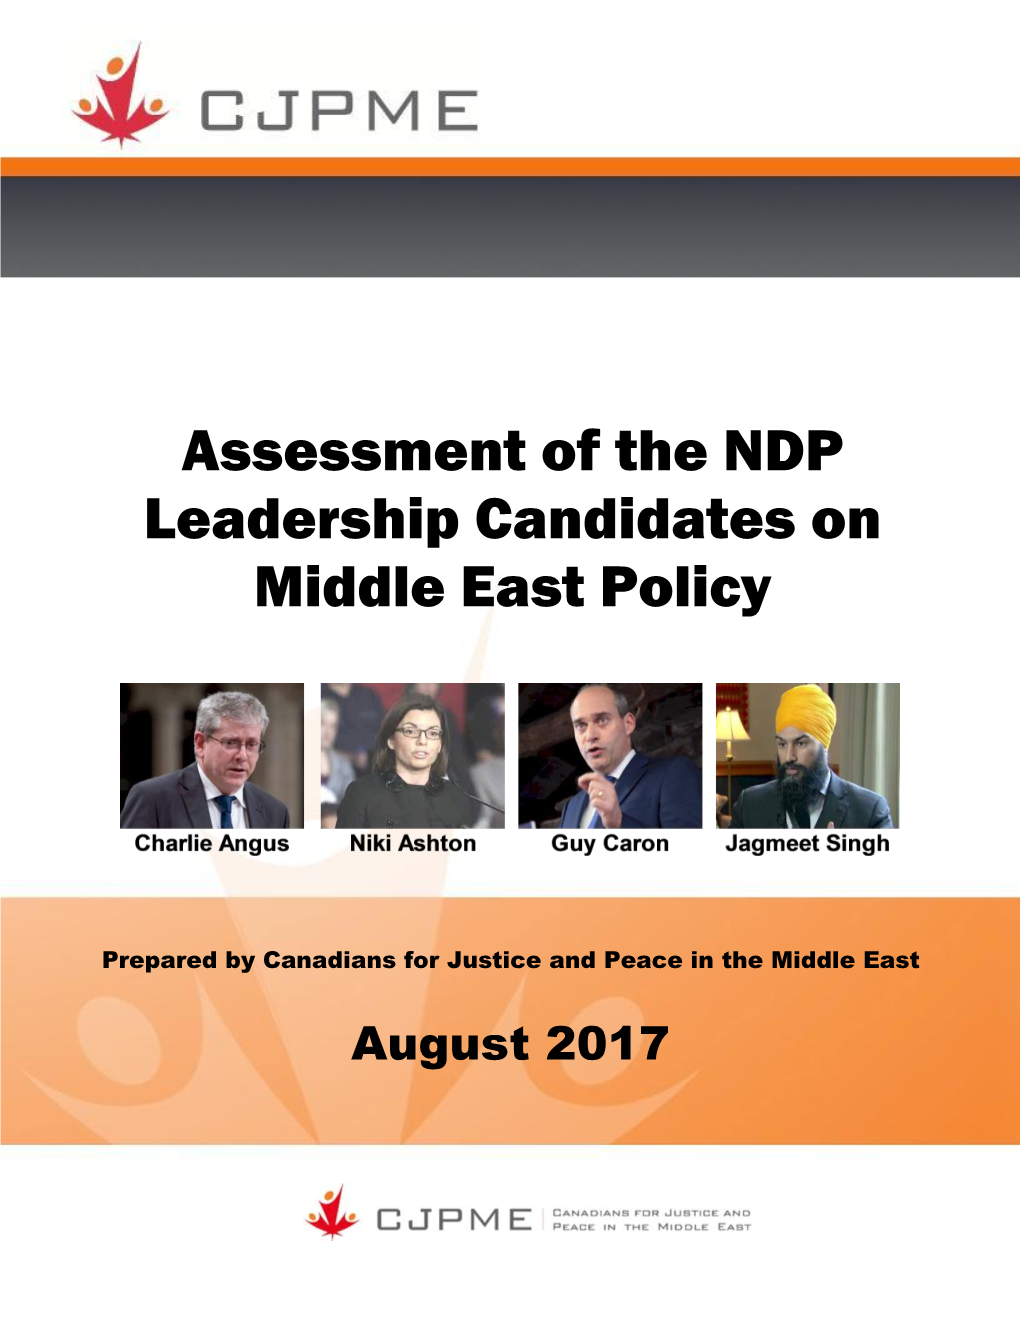 Assessment of the NDP Leadership Candidates on Middle East Policy